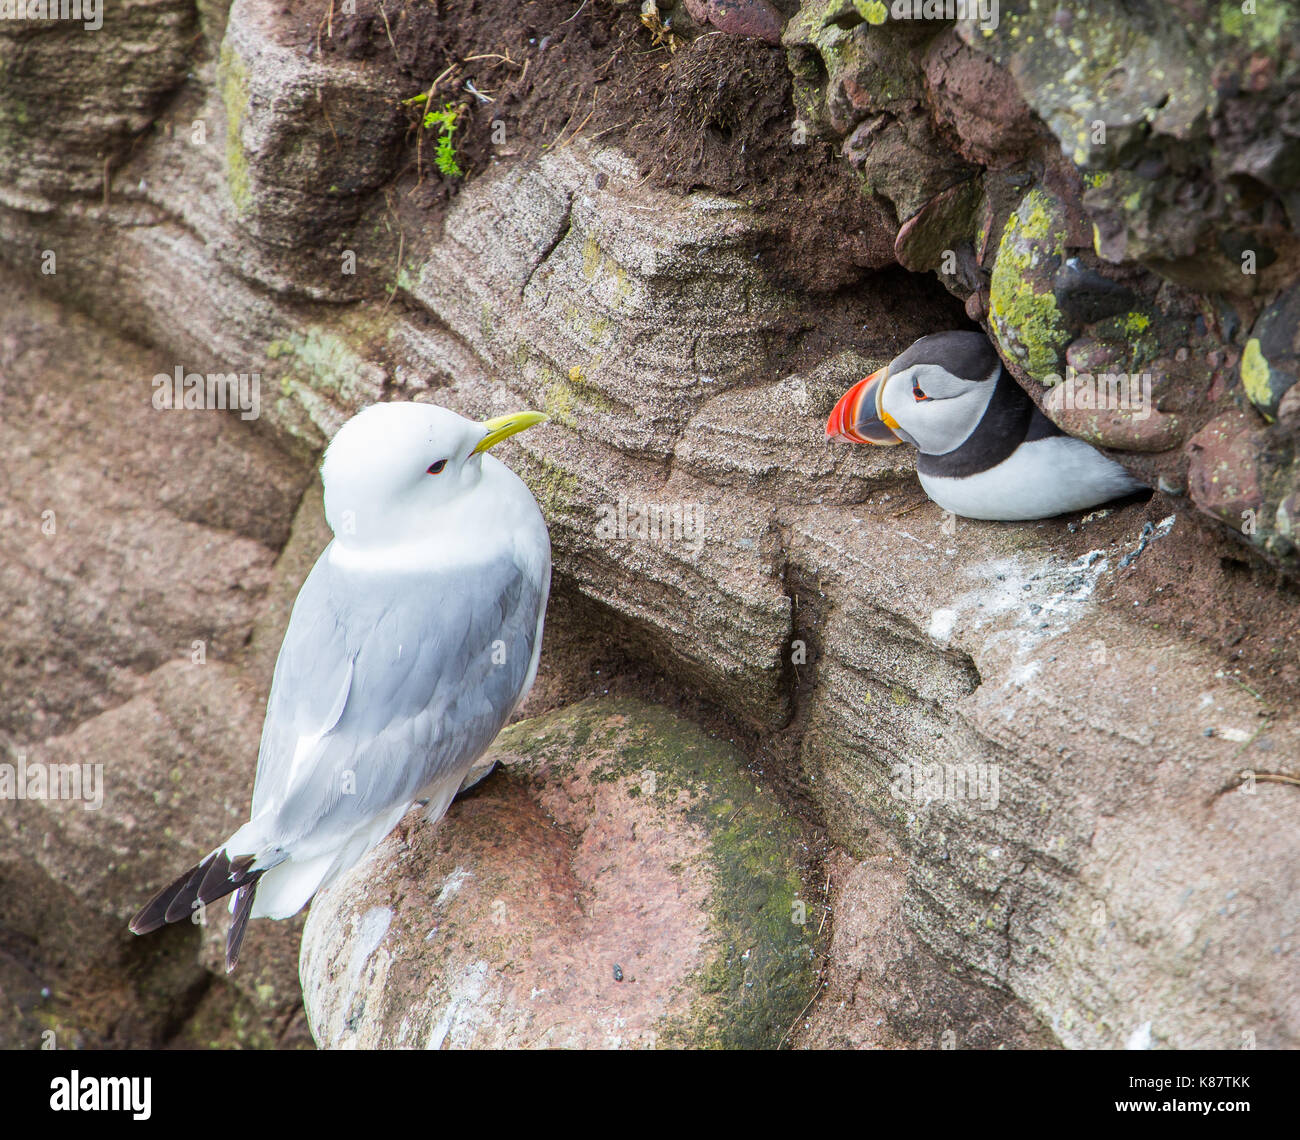 A puffin defends it's young nest from a seagull on cliffs at Fowlsheugh Nature Reserve at Crawton, Aberdeenshire, Scotland, UK Stock Photo